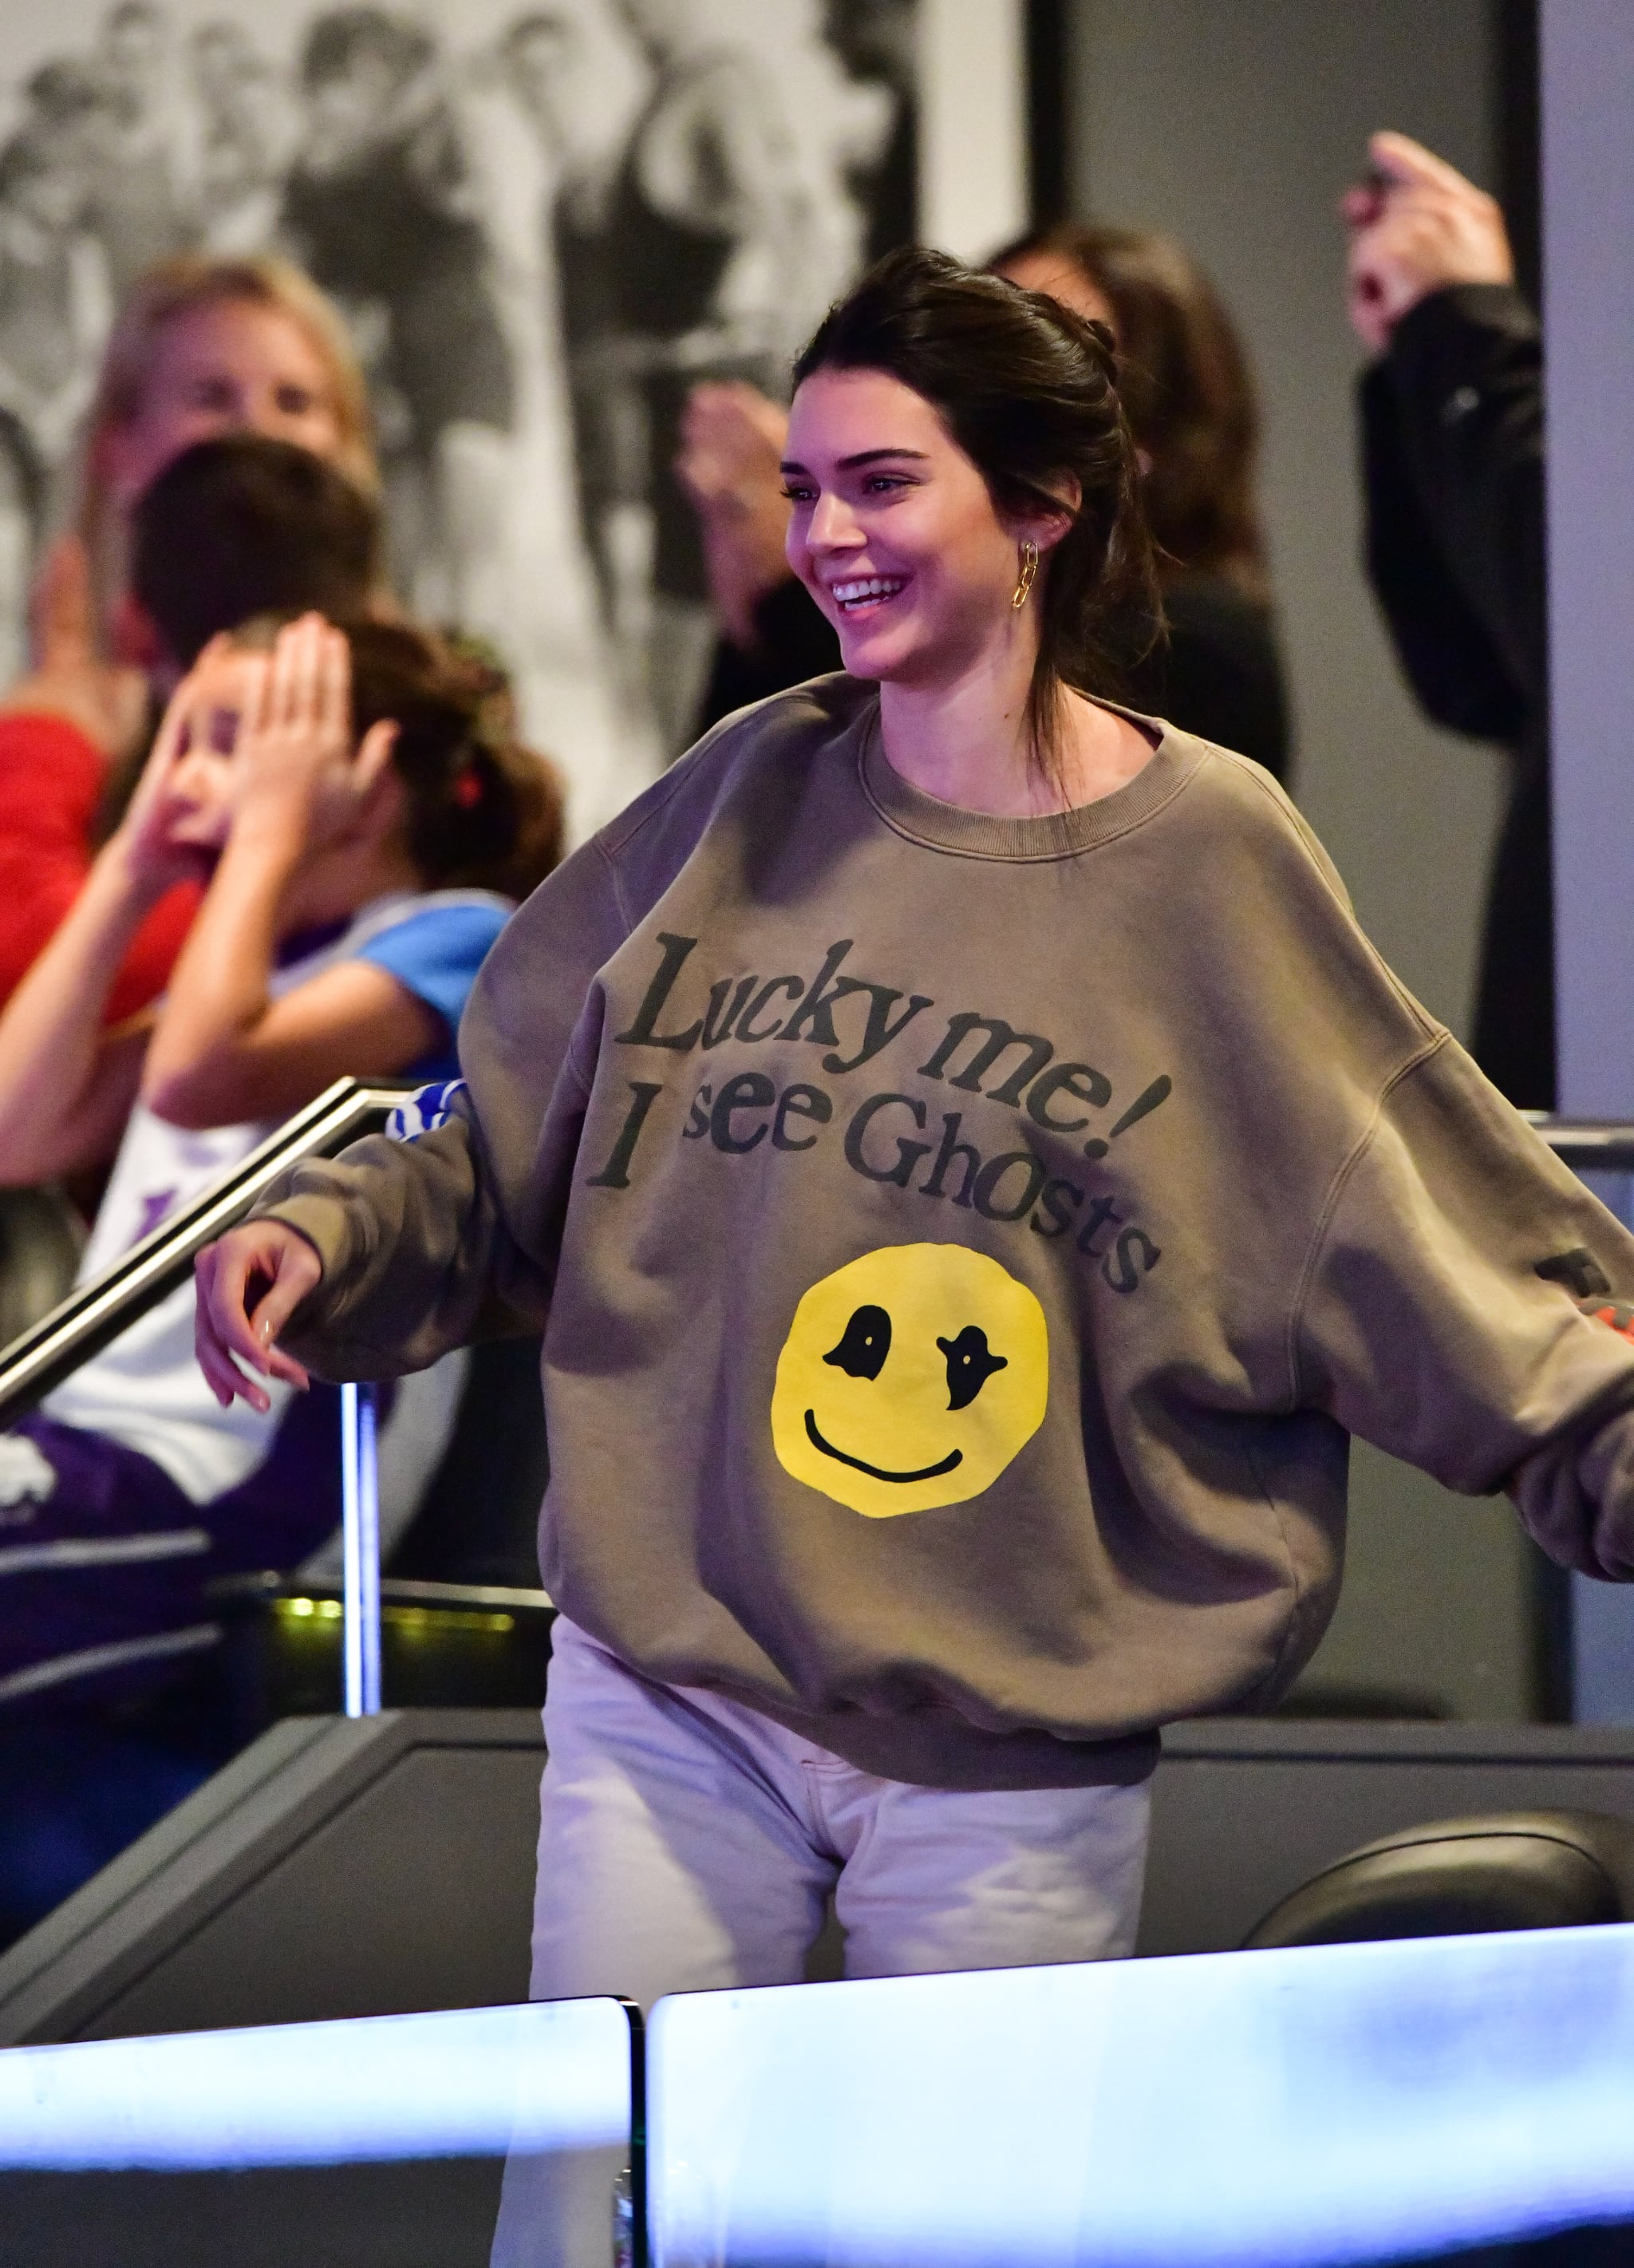 Kendall Jenner's I See Ghosts Sweatshirt 2018